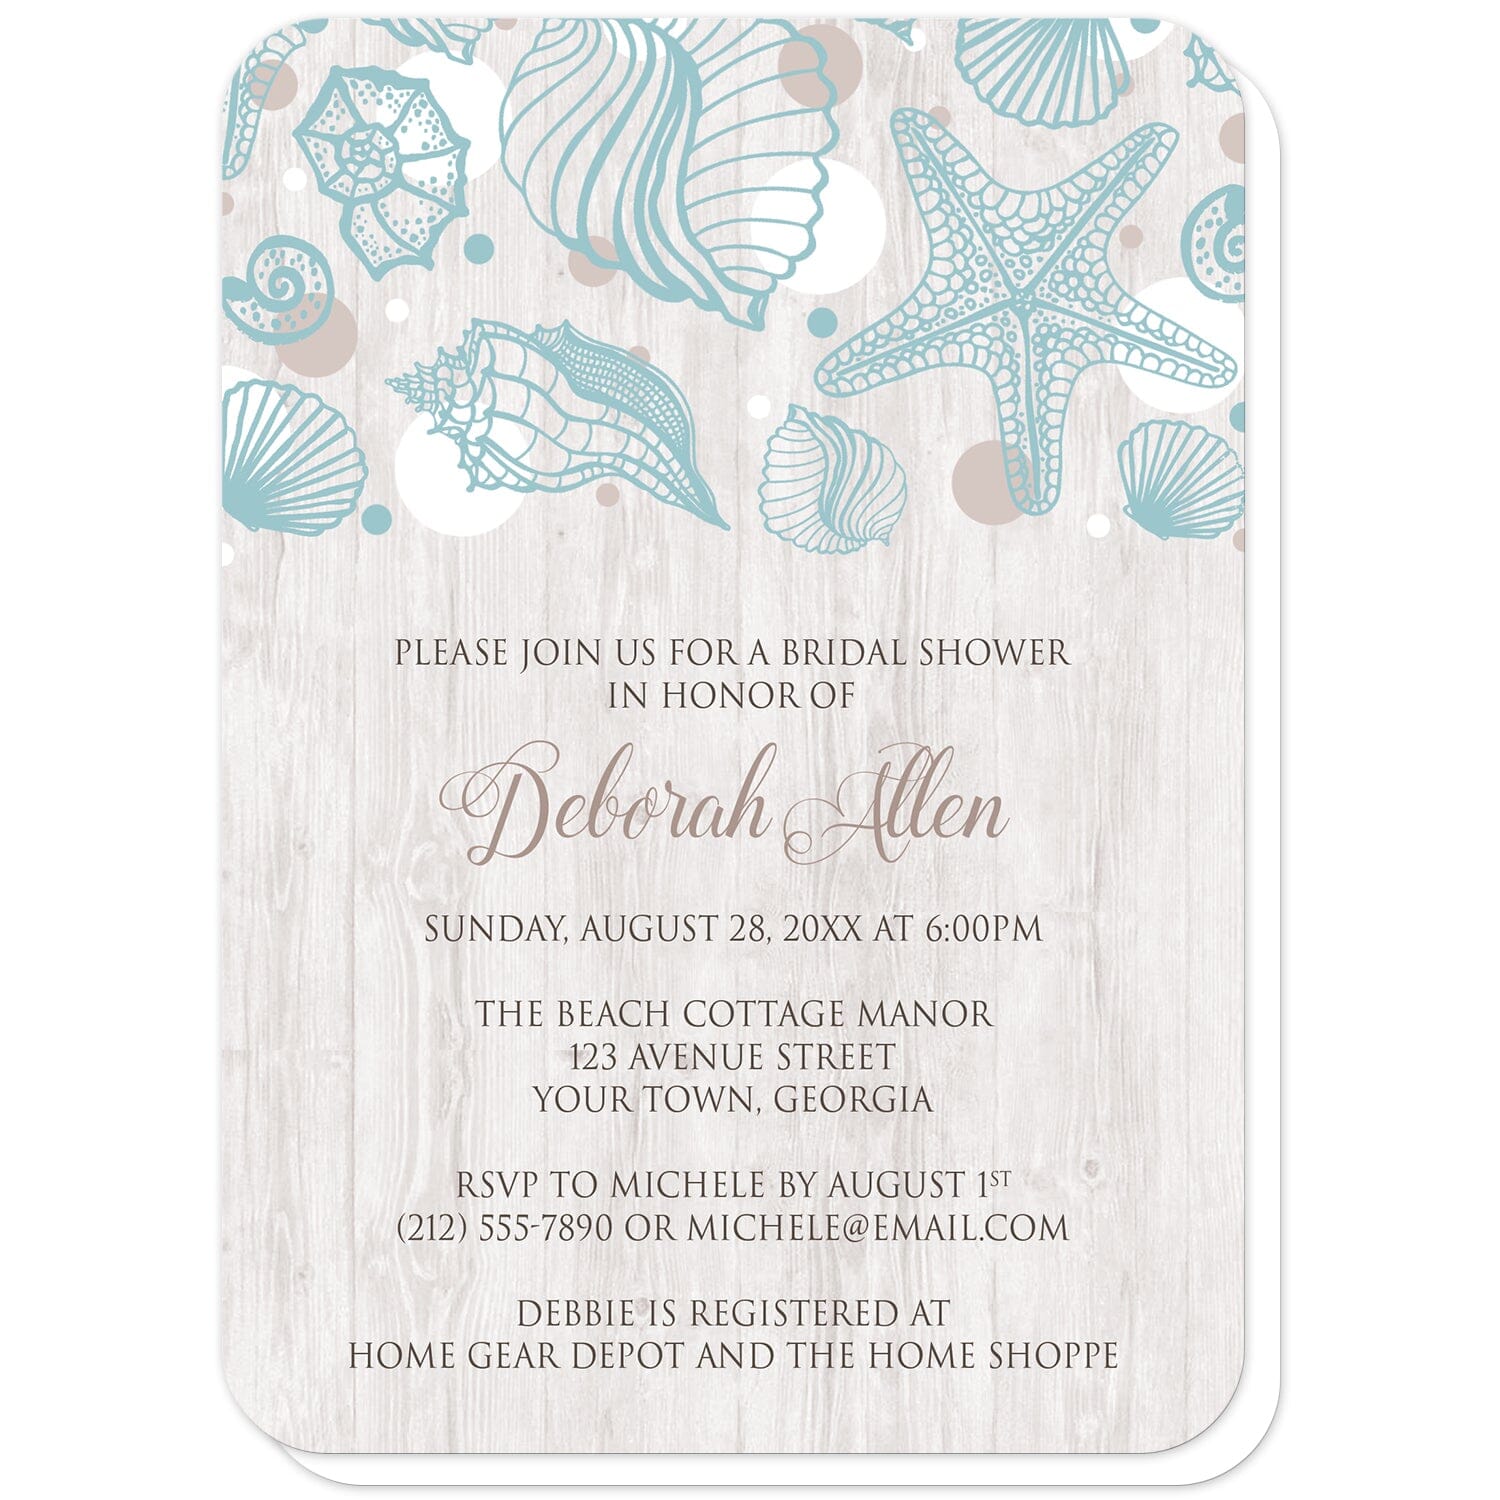 Seashell Whitewashed Wood Beach Bridal Shower Invitations (with rounded corners) at Artistically Invited. Rustic-chic seashell whitewashed wood beach bridal shower invitations with a turquoise seashell line drawing with accent tan and white dots over a light whitewashed wood illustration. Your personalized bridal shower celebration details are custom printed in tan and brown over the whitewashed wood background below the seashells.